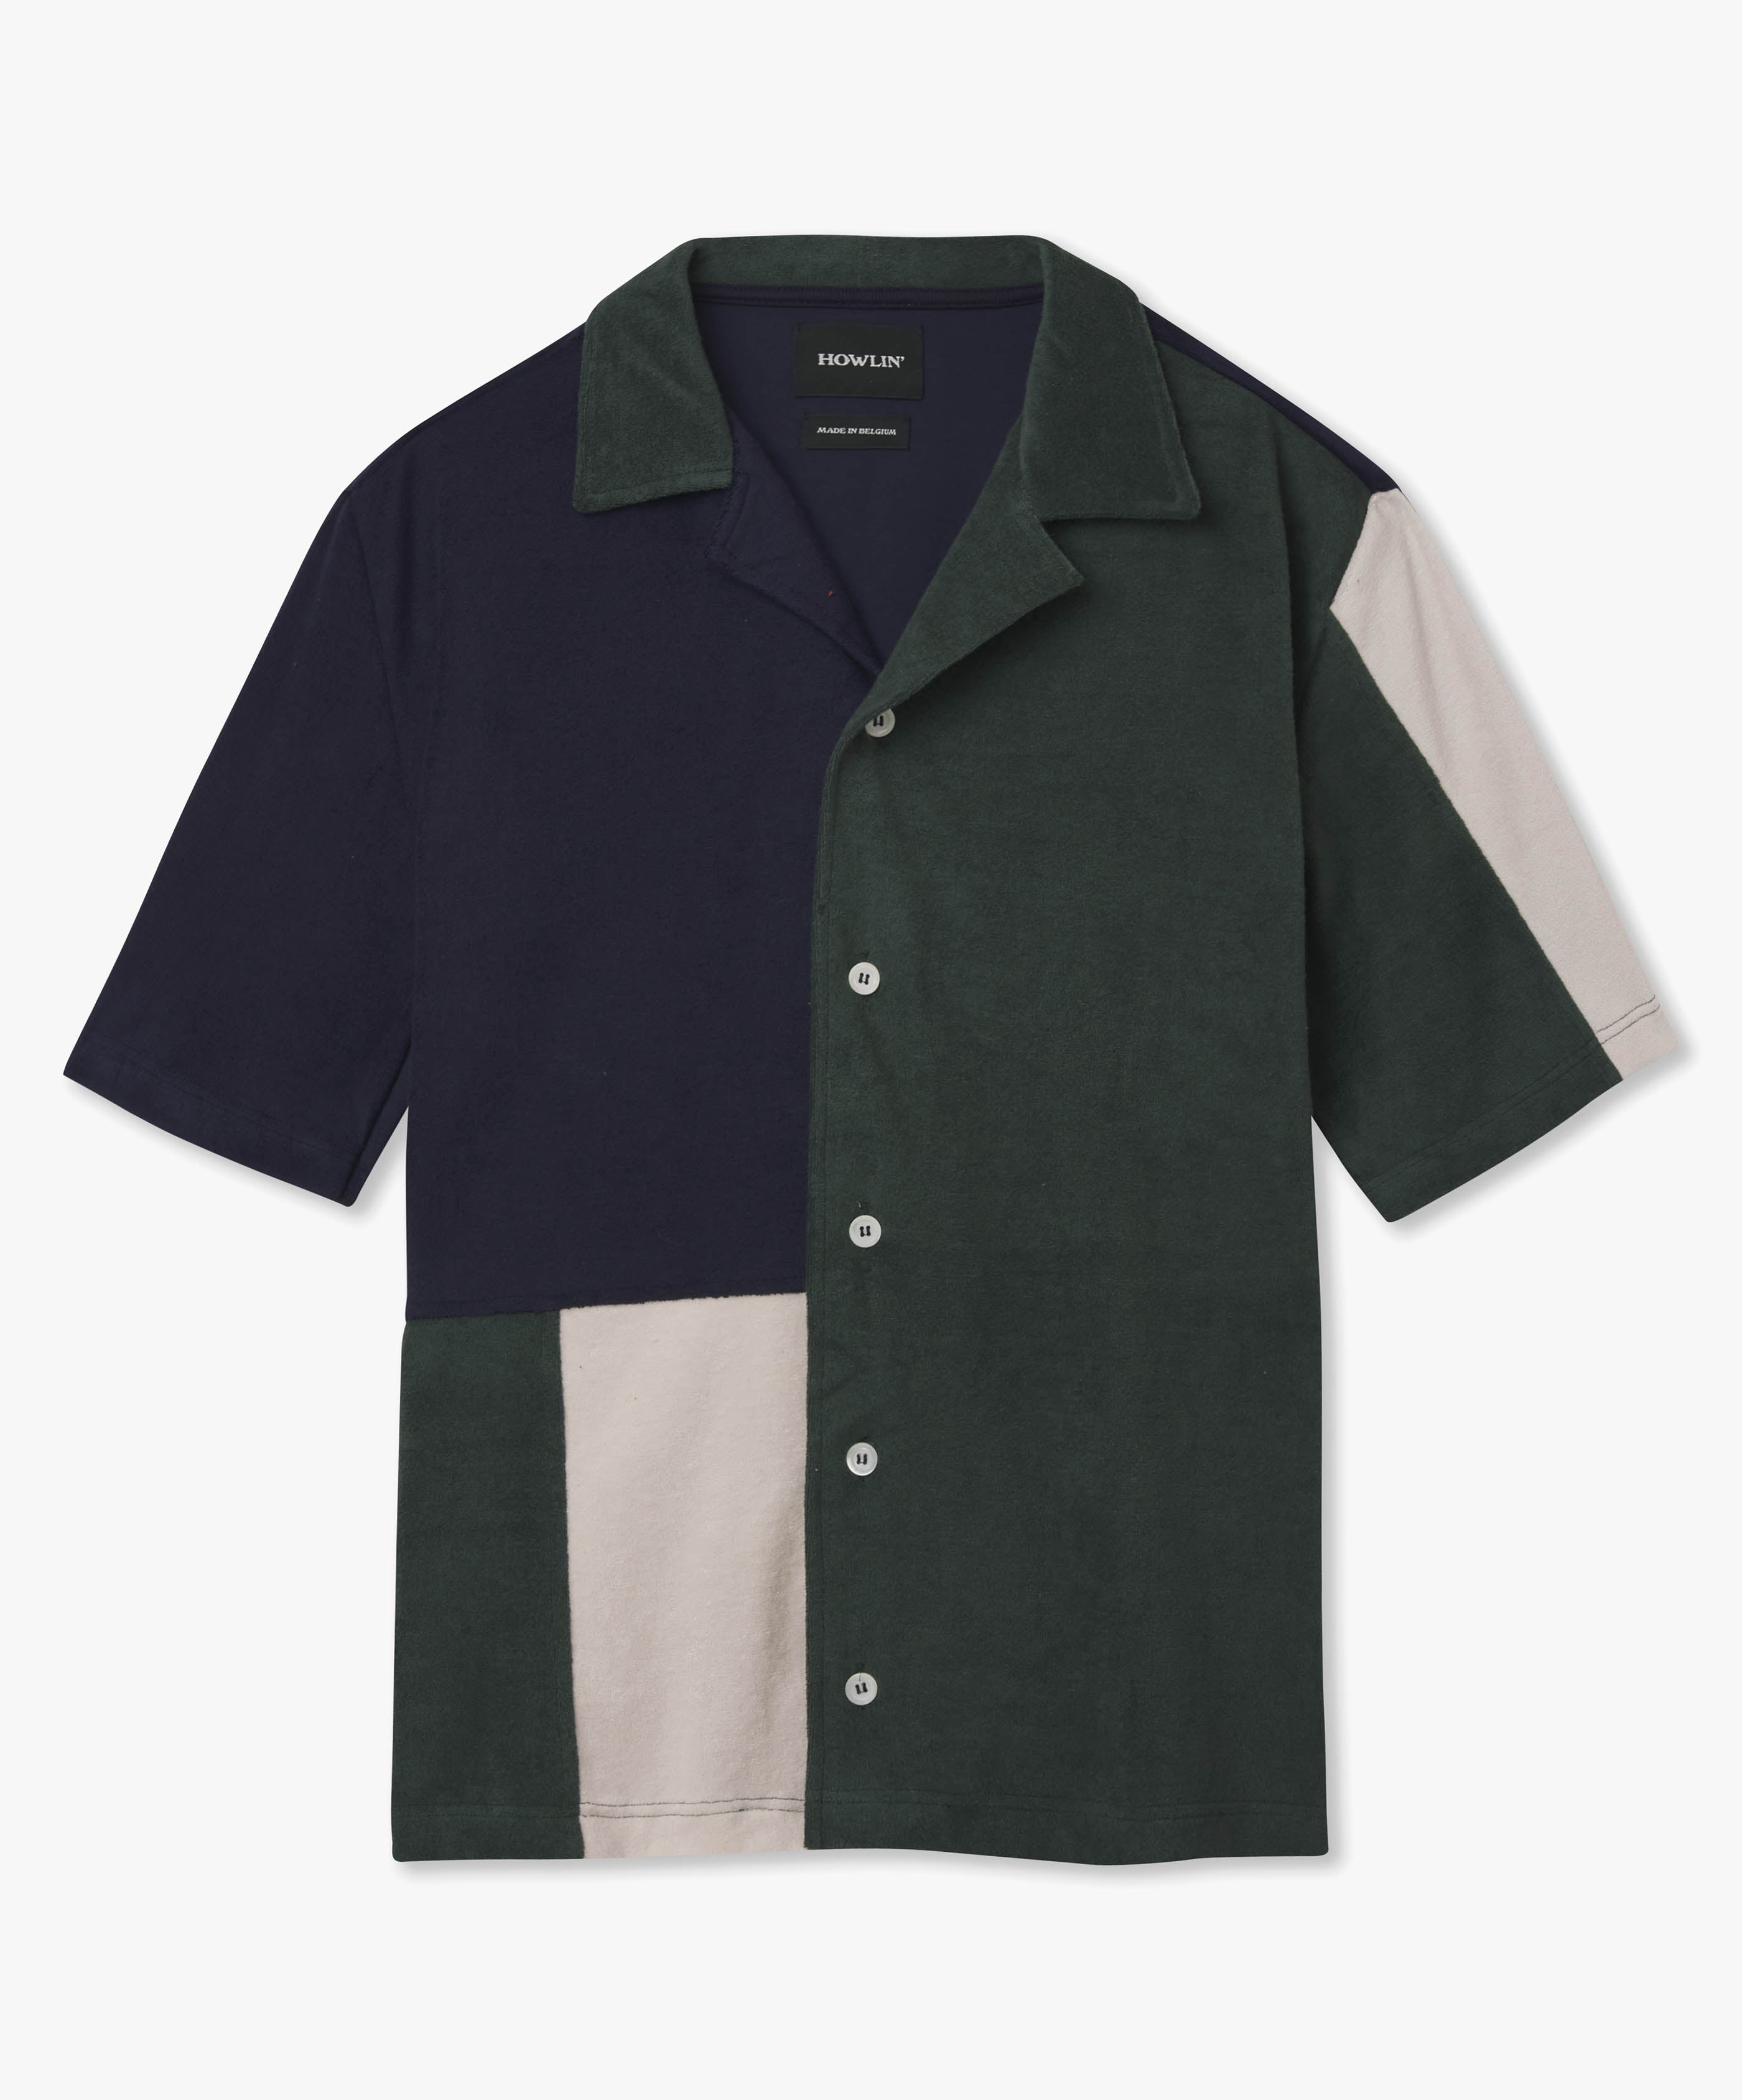 Cocktail in Towel Colorblock Short Sleeve Shirt Navy